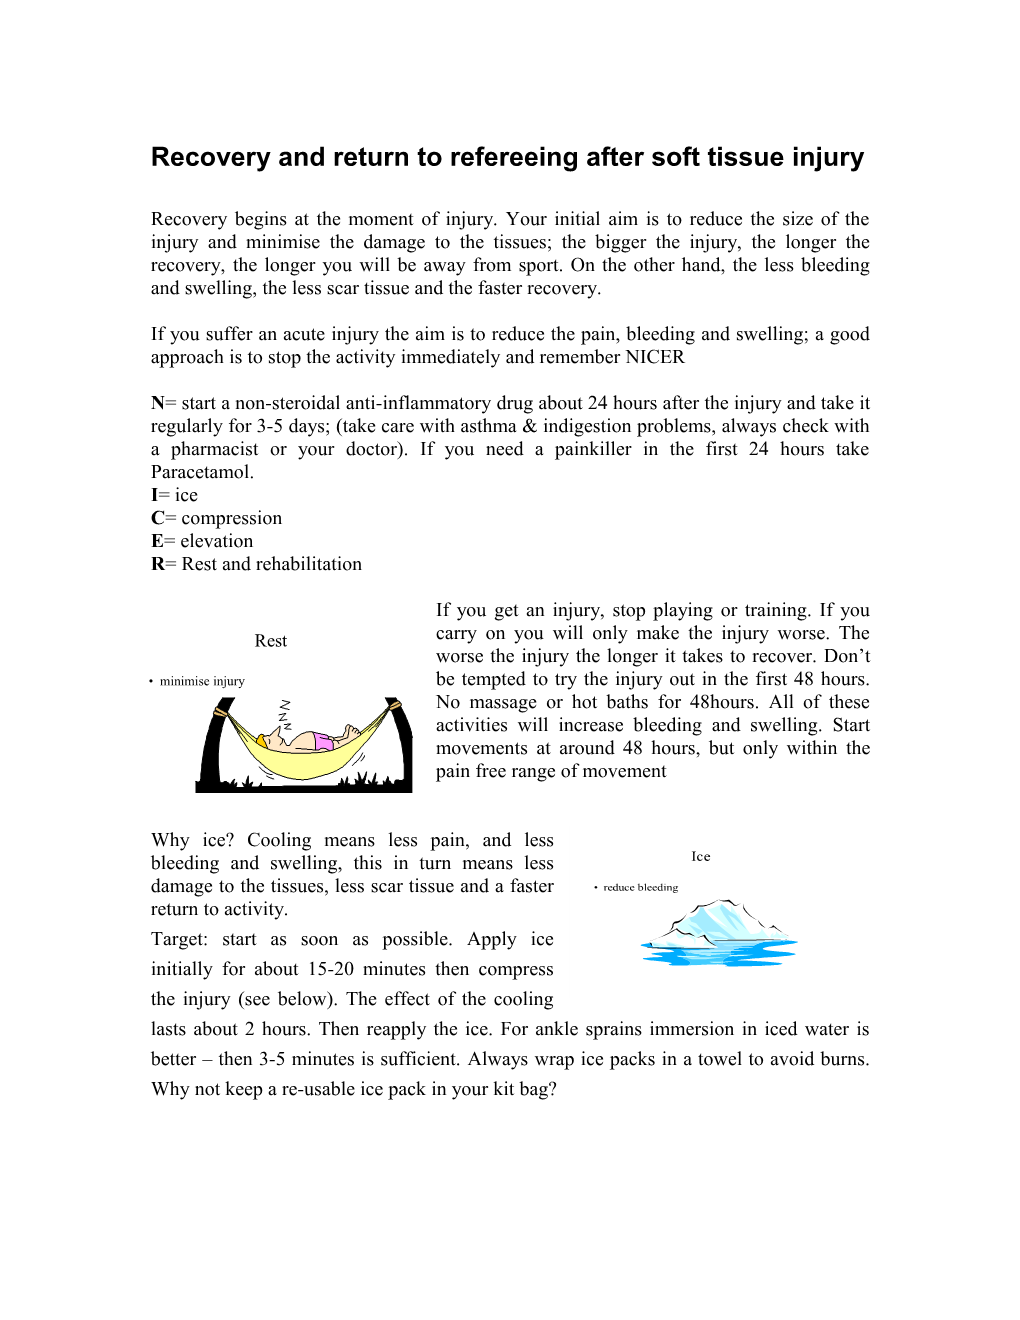 Recovery and Return to Refereeing After Soft Tissue Injury